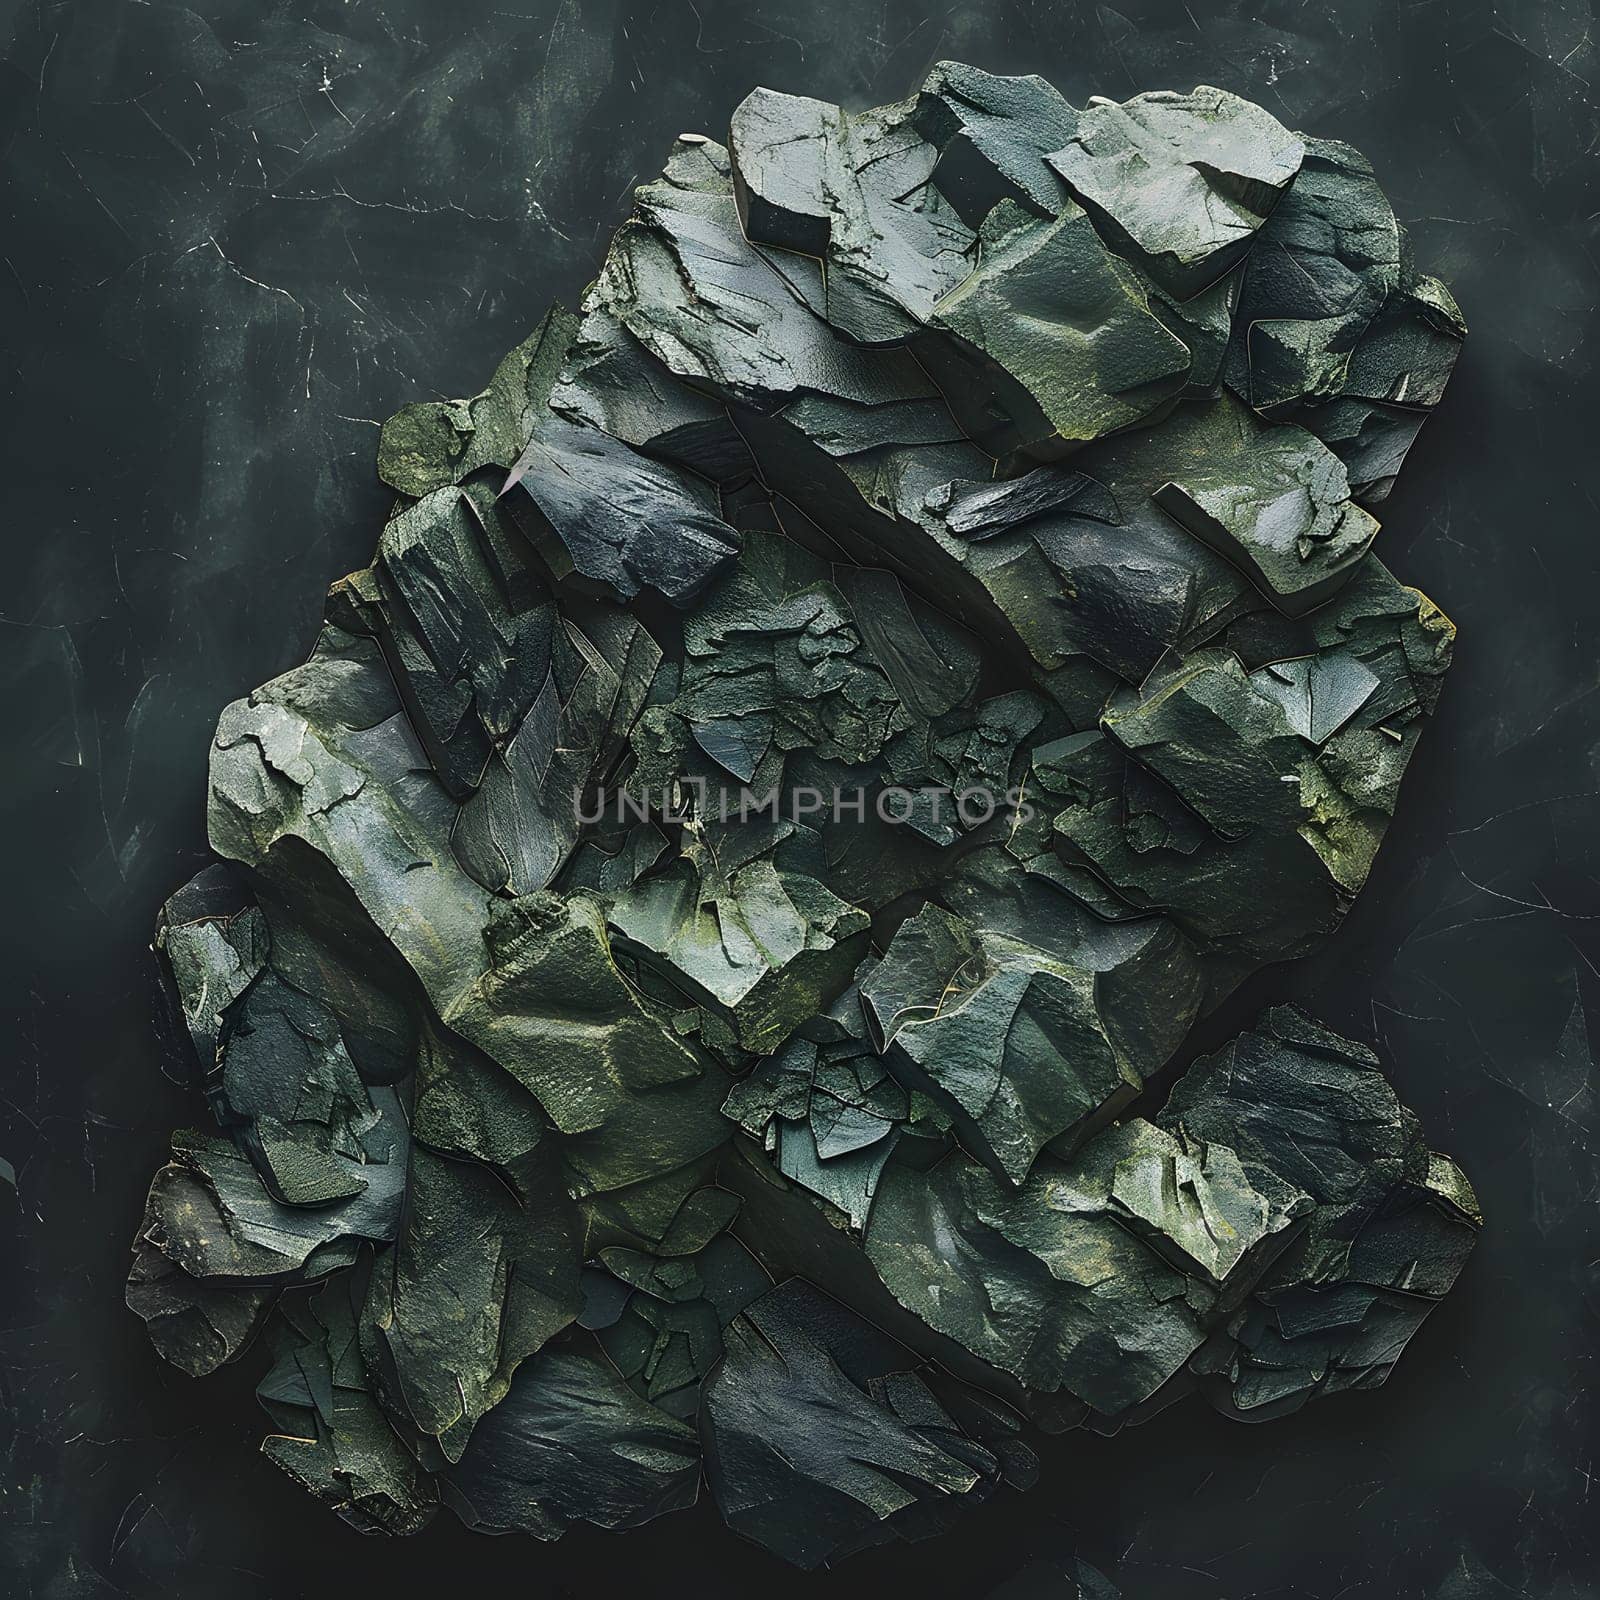 A close up still life photography of bedrock rocks arranged in a pattern on a black surface, blending in with the camouflage of the military background